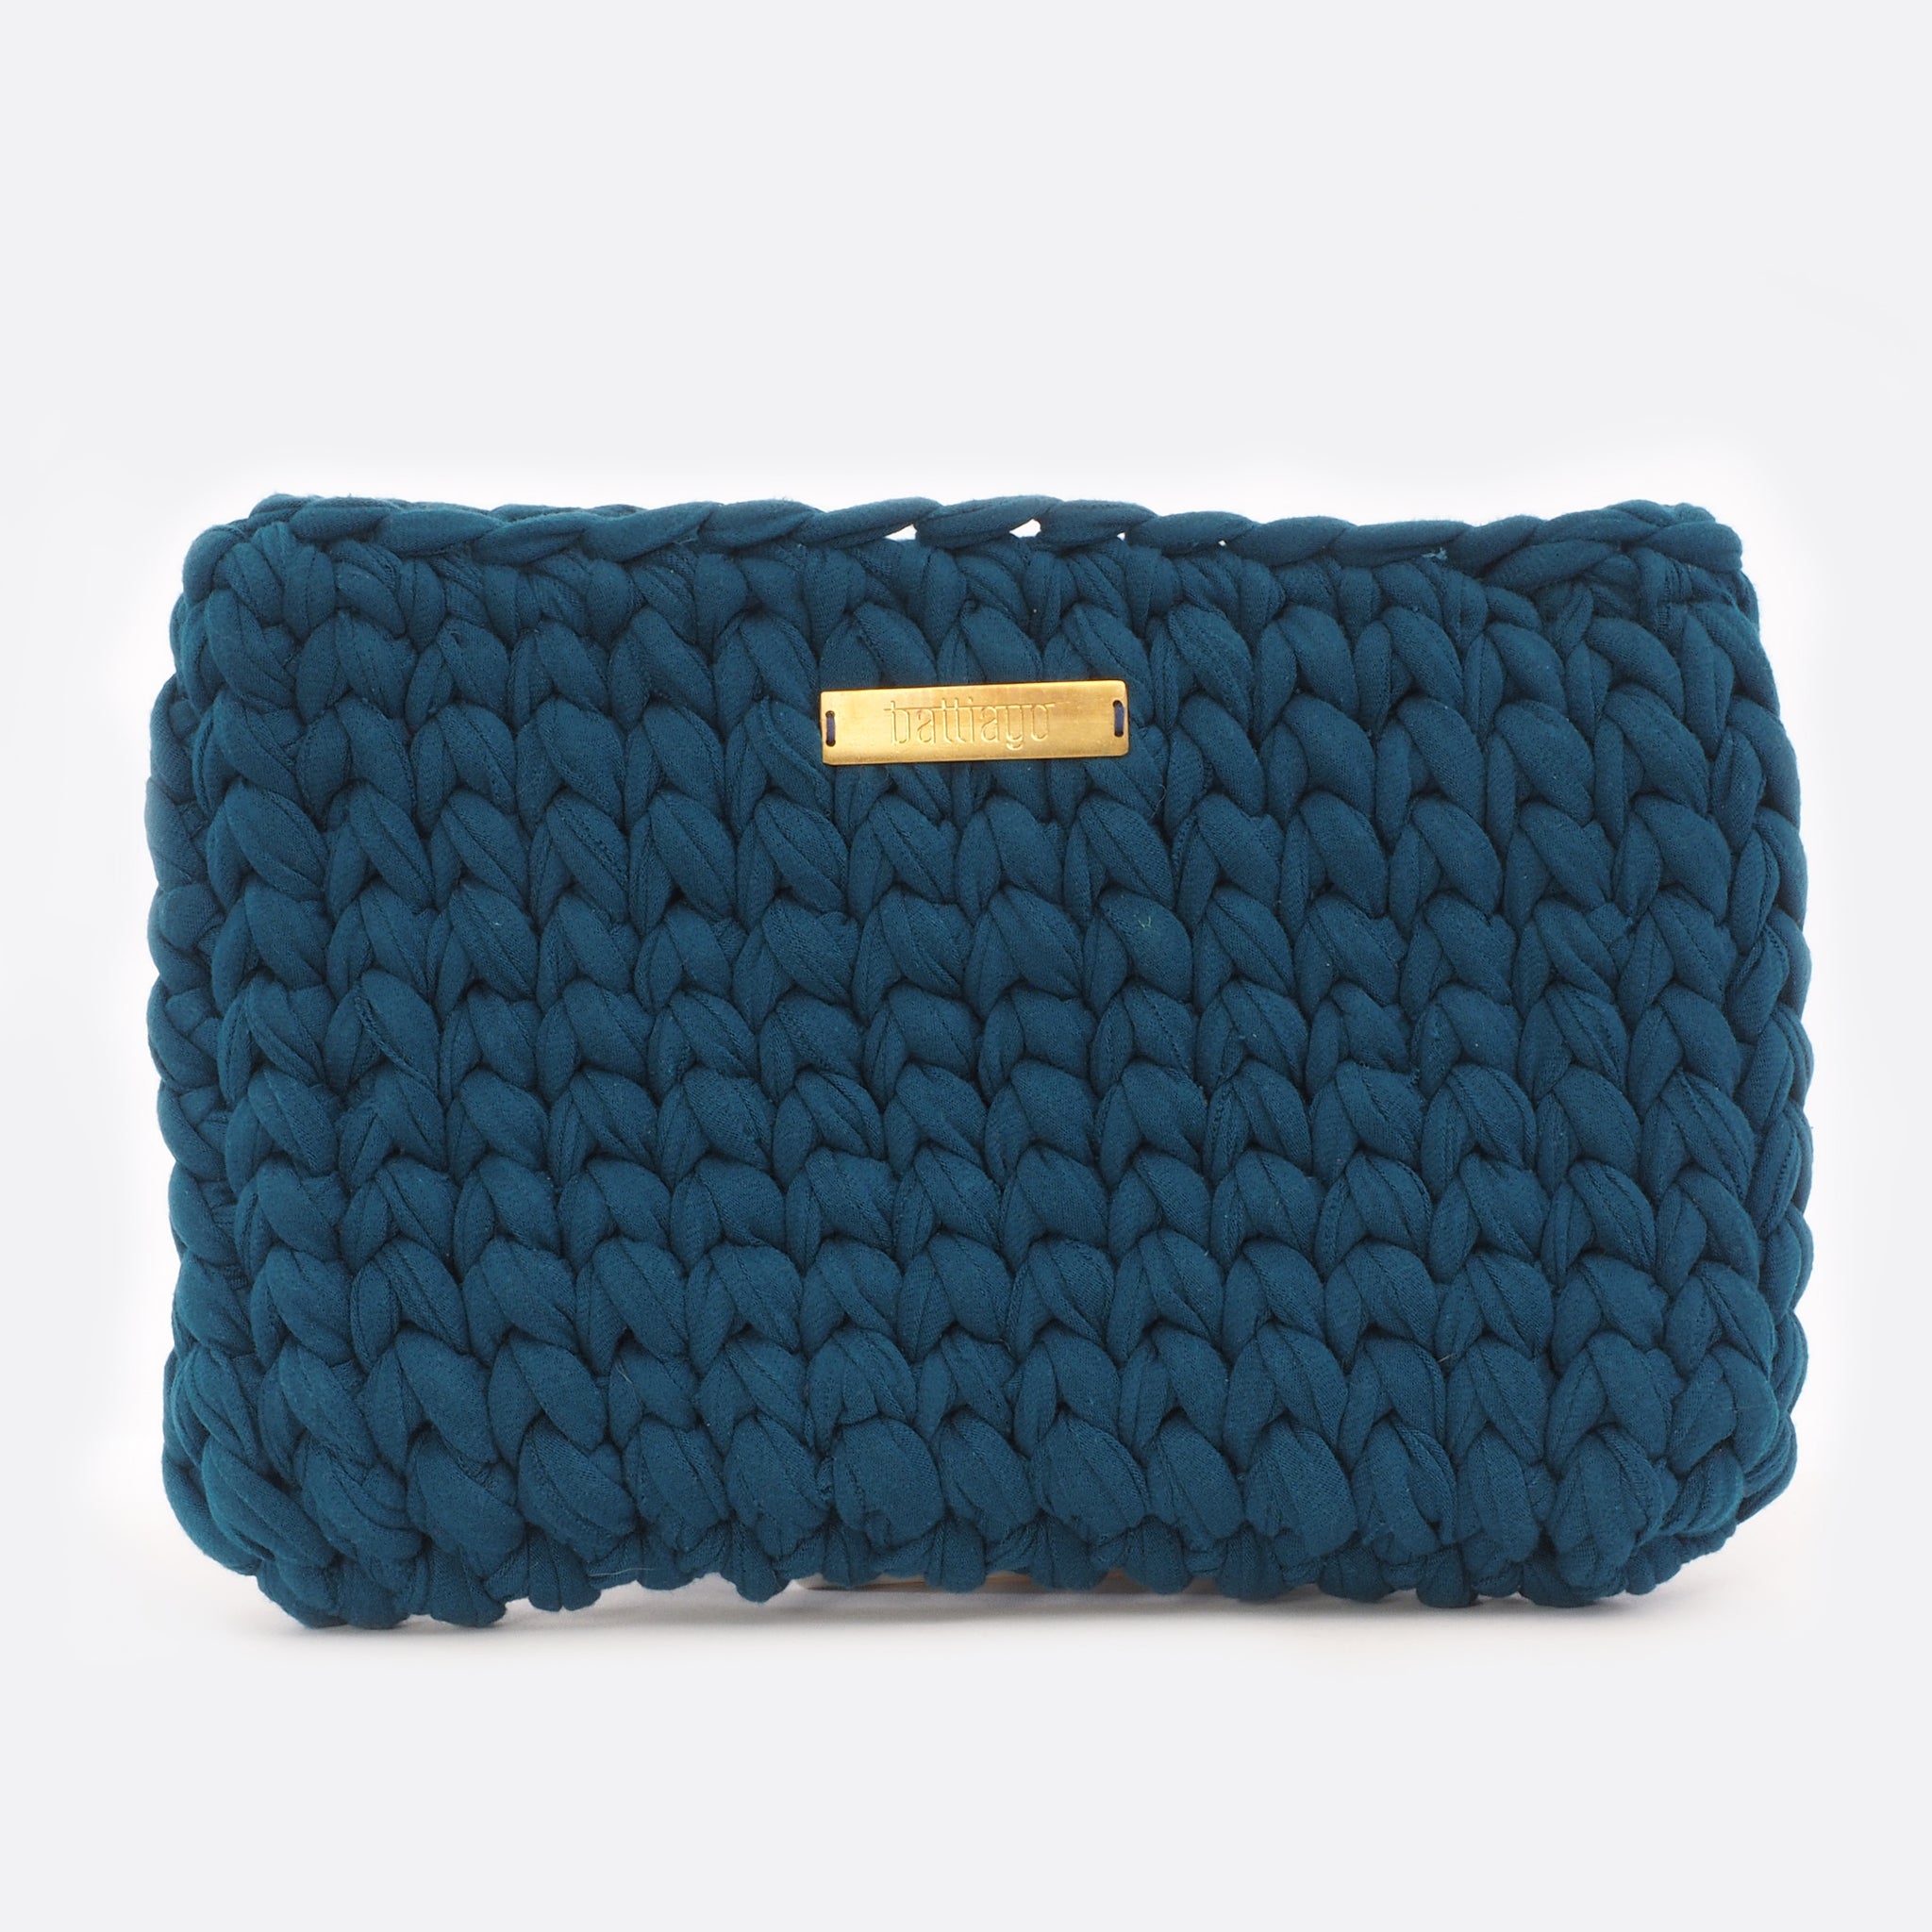 Front view of the big dark blue Battiayo clutch. The bag is crocheted by women. The handcut brass label is placed in the middle of the bag, close to the top. The bag is a chunky crocheted clutch. 